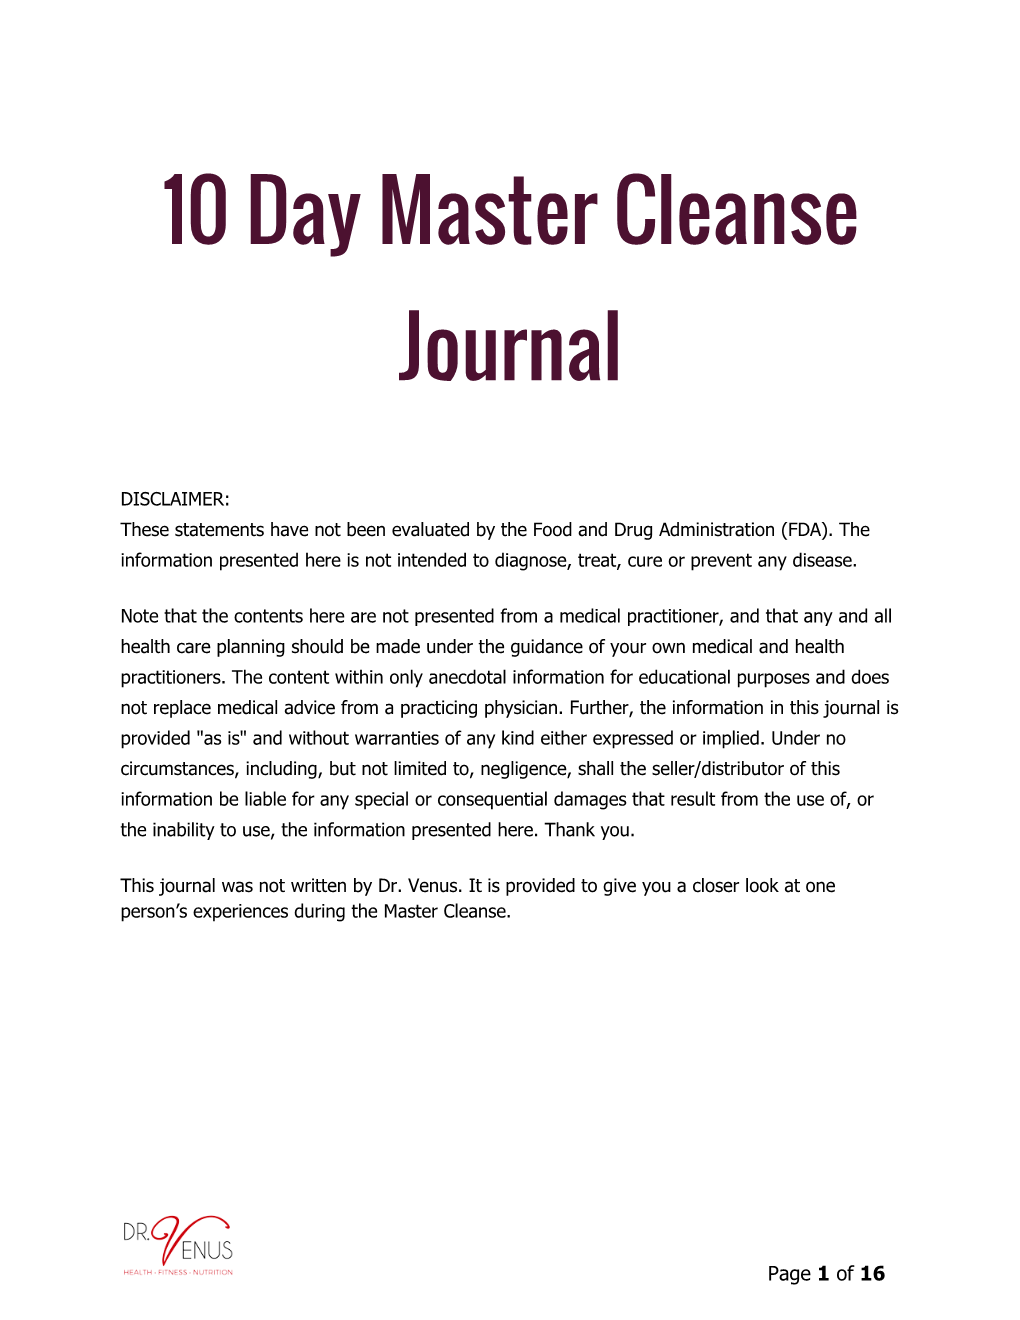 10 Day Master Cleanse Journal